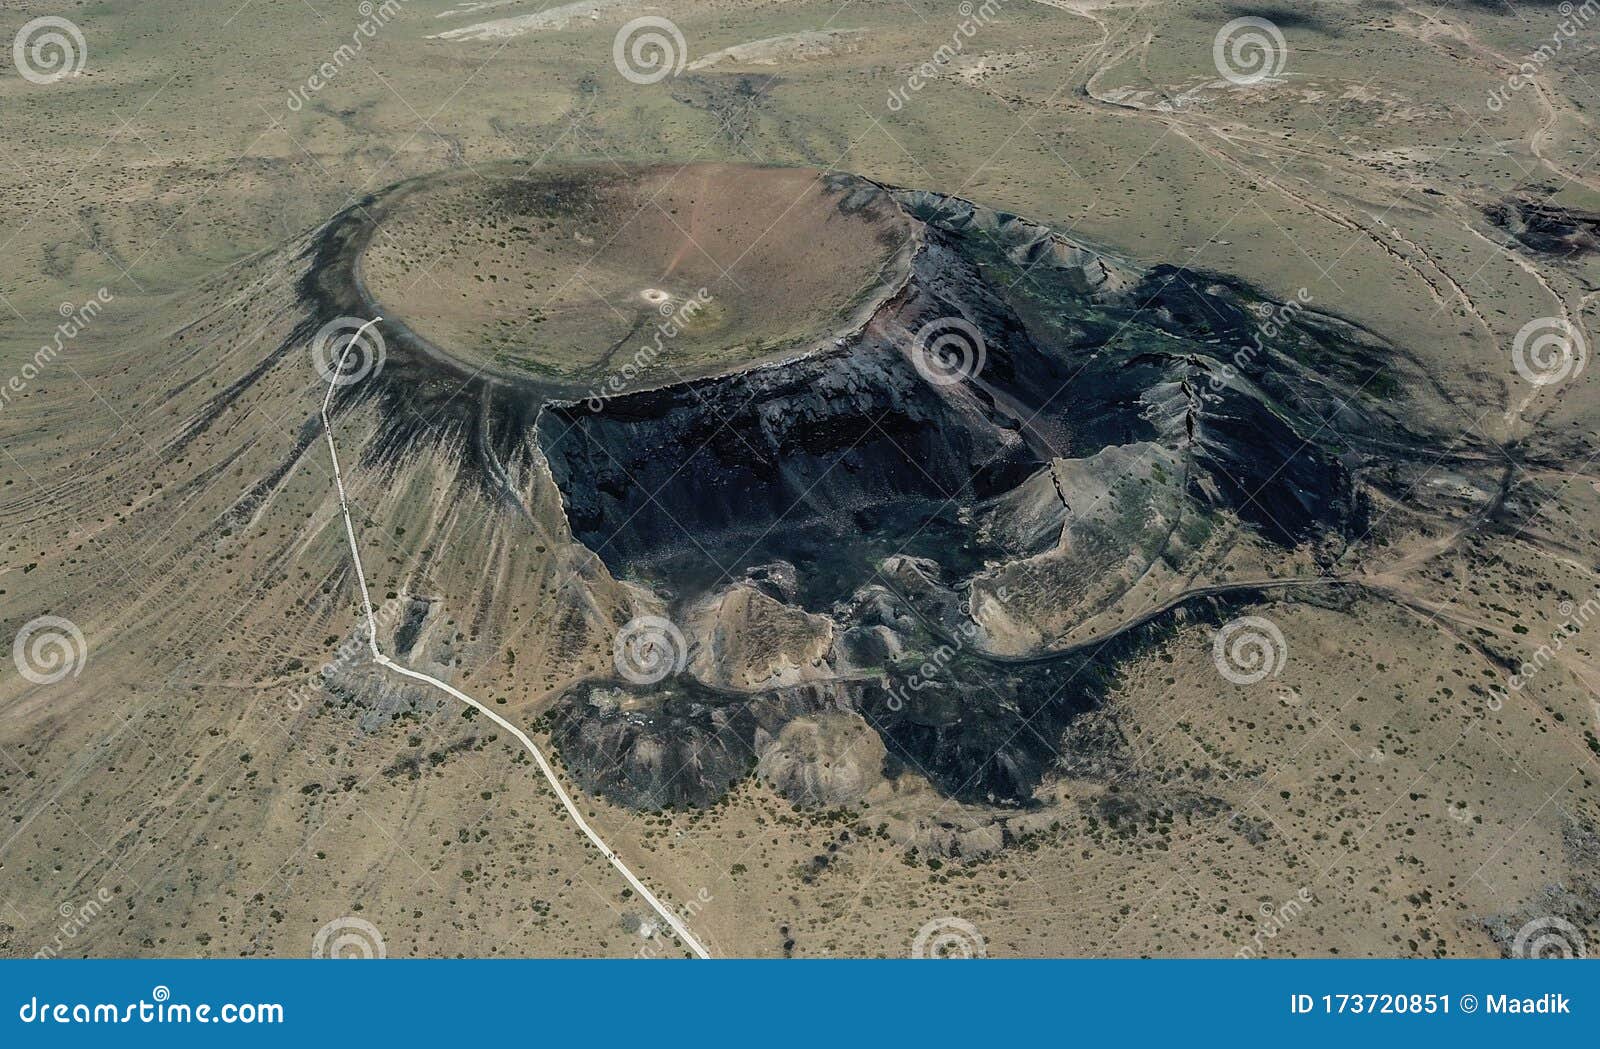 aerial photography of natural scenery of ulan hada volcano group chahar volcano group in inner mongolia, china